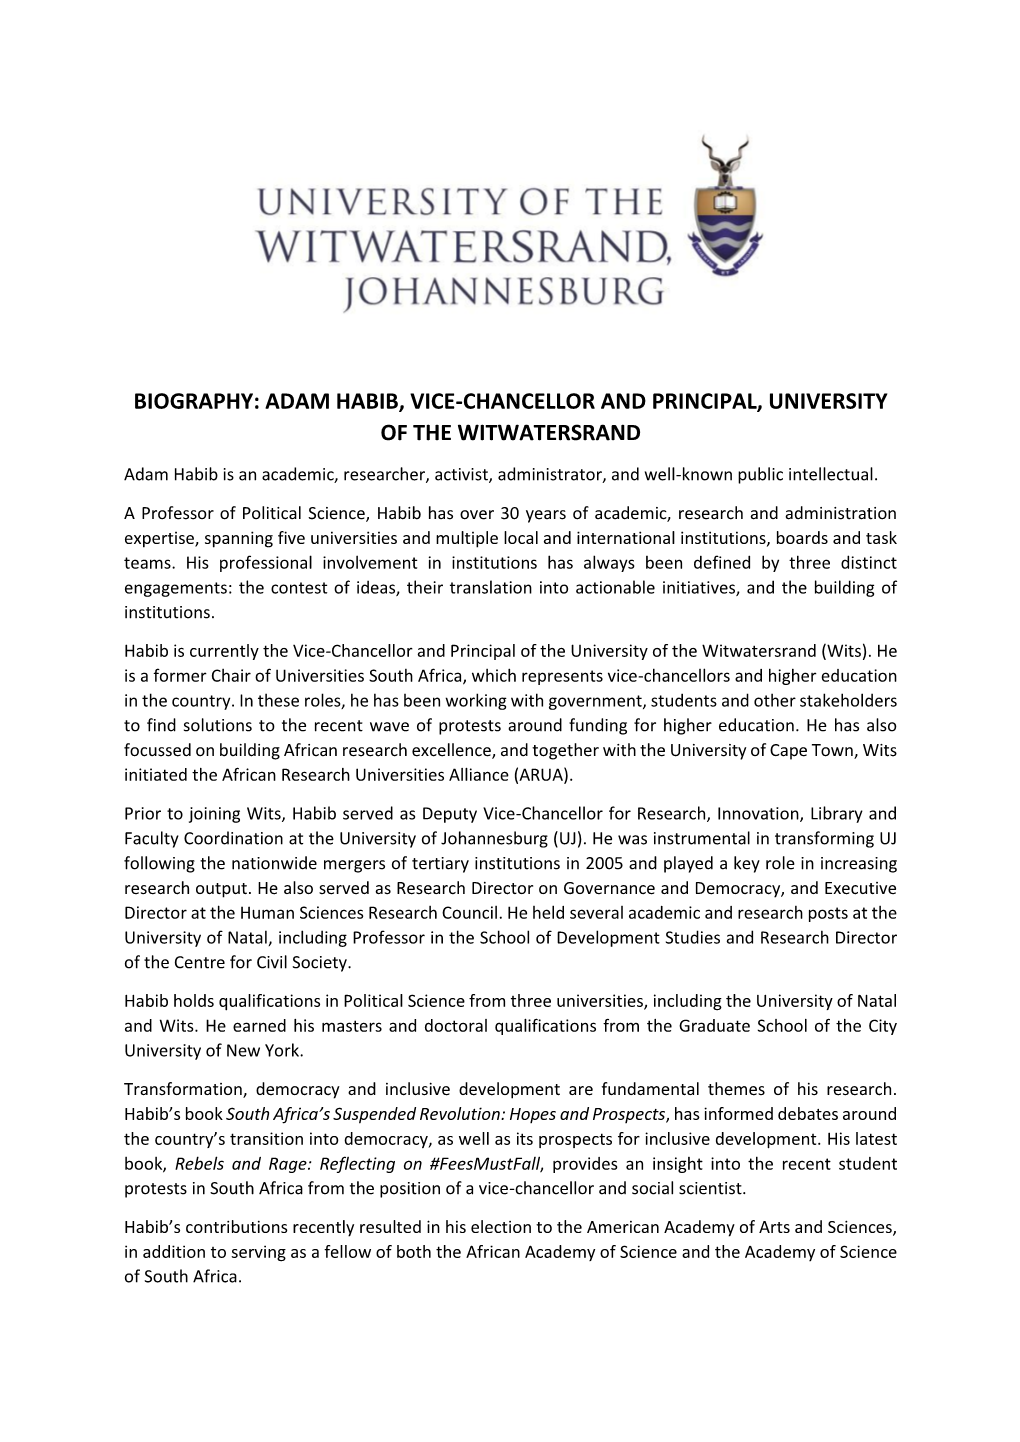 Biography: Adam Habib, Vice-Chancellor and Principal, University of the Witwatersrand